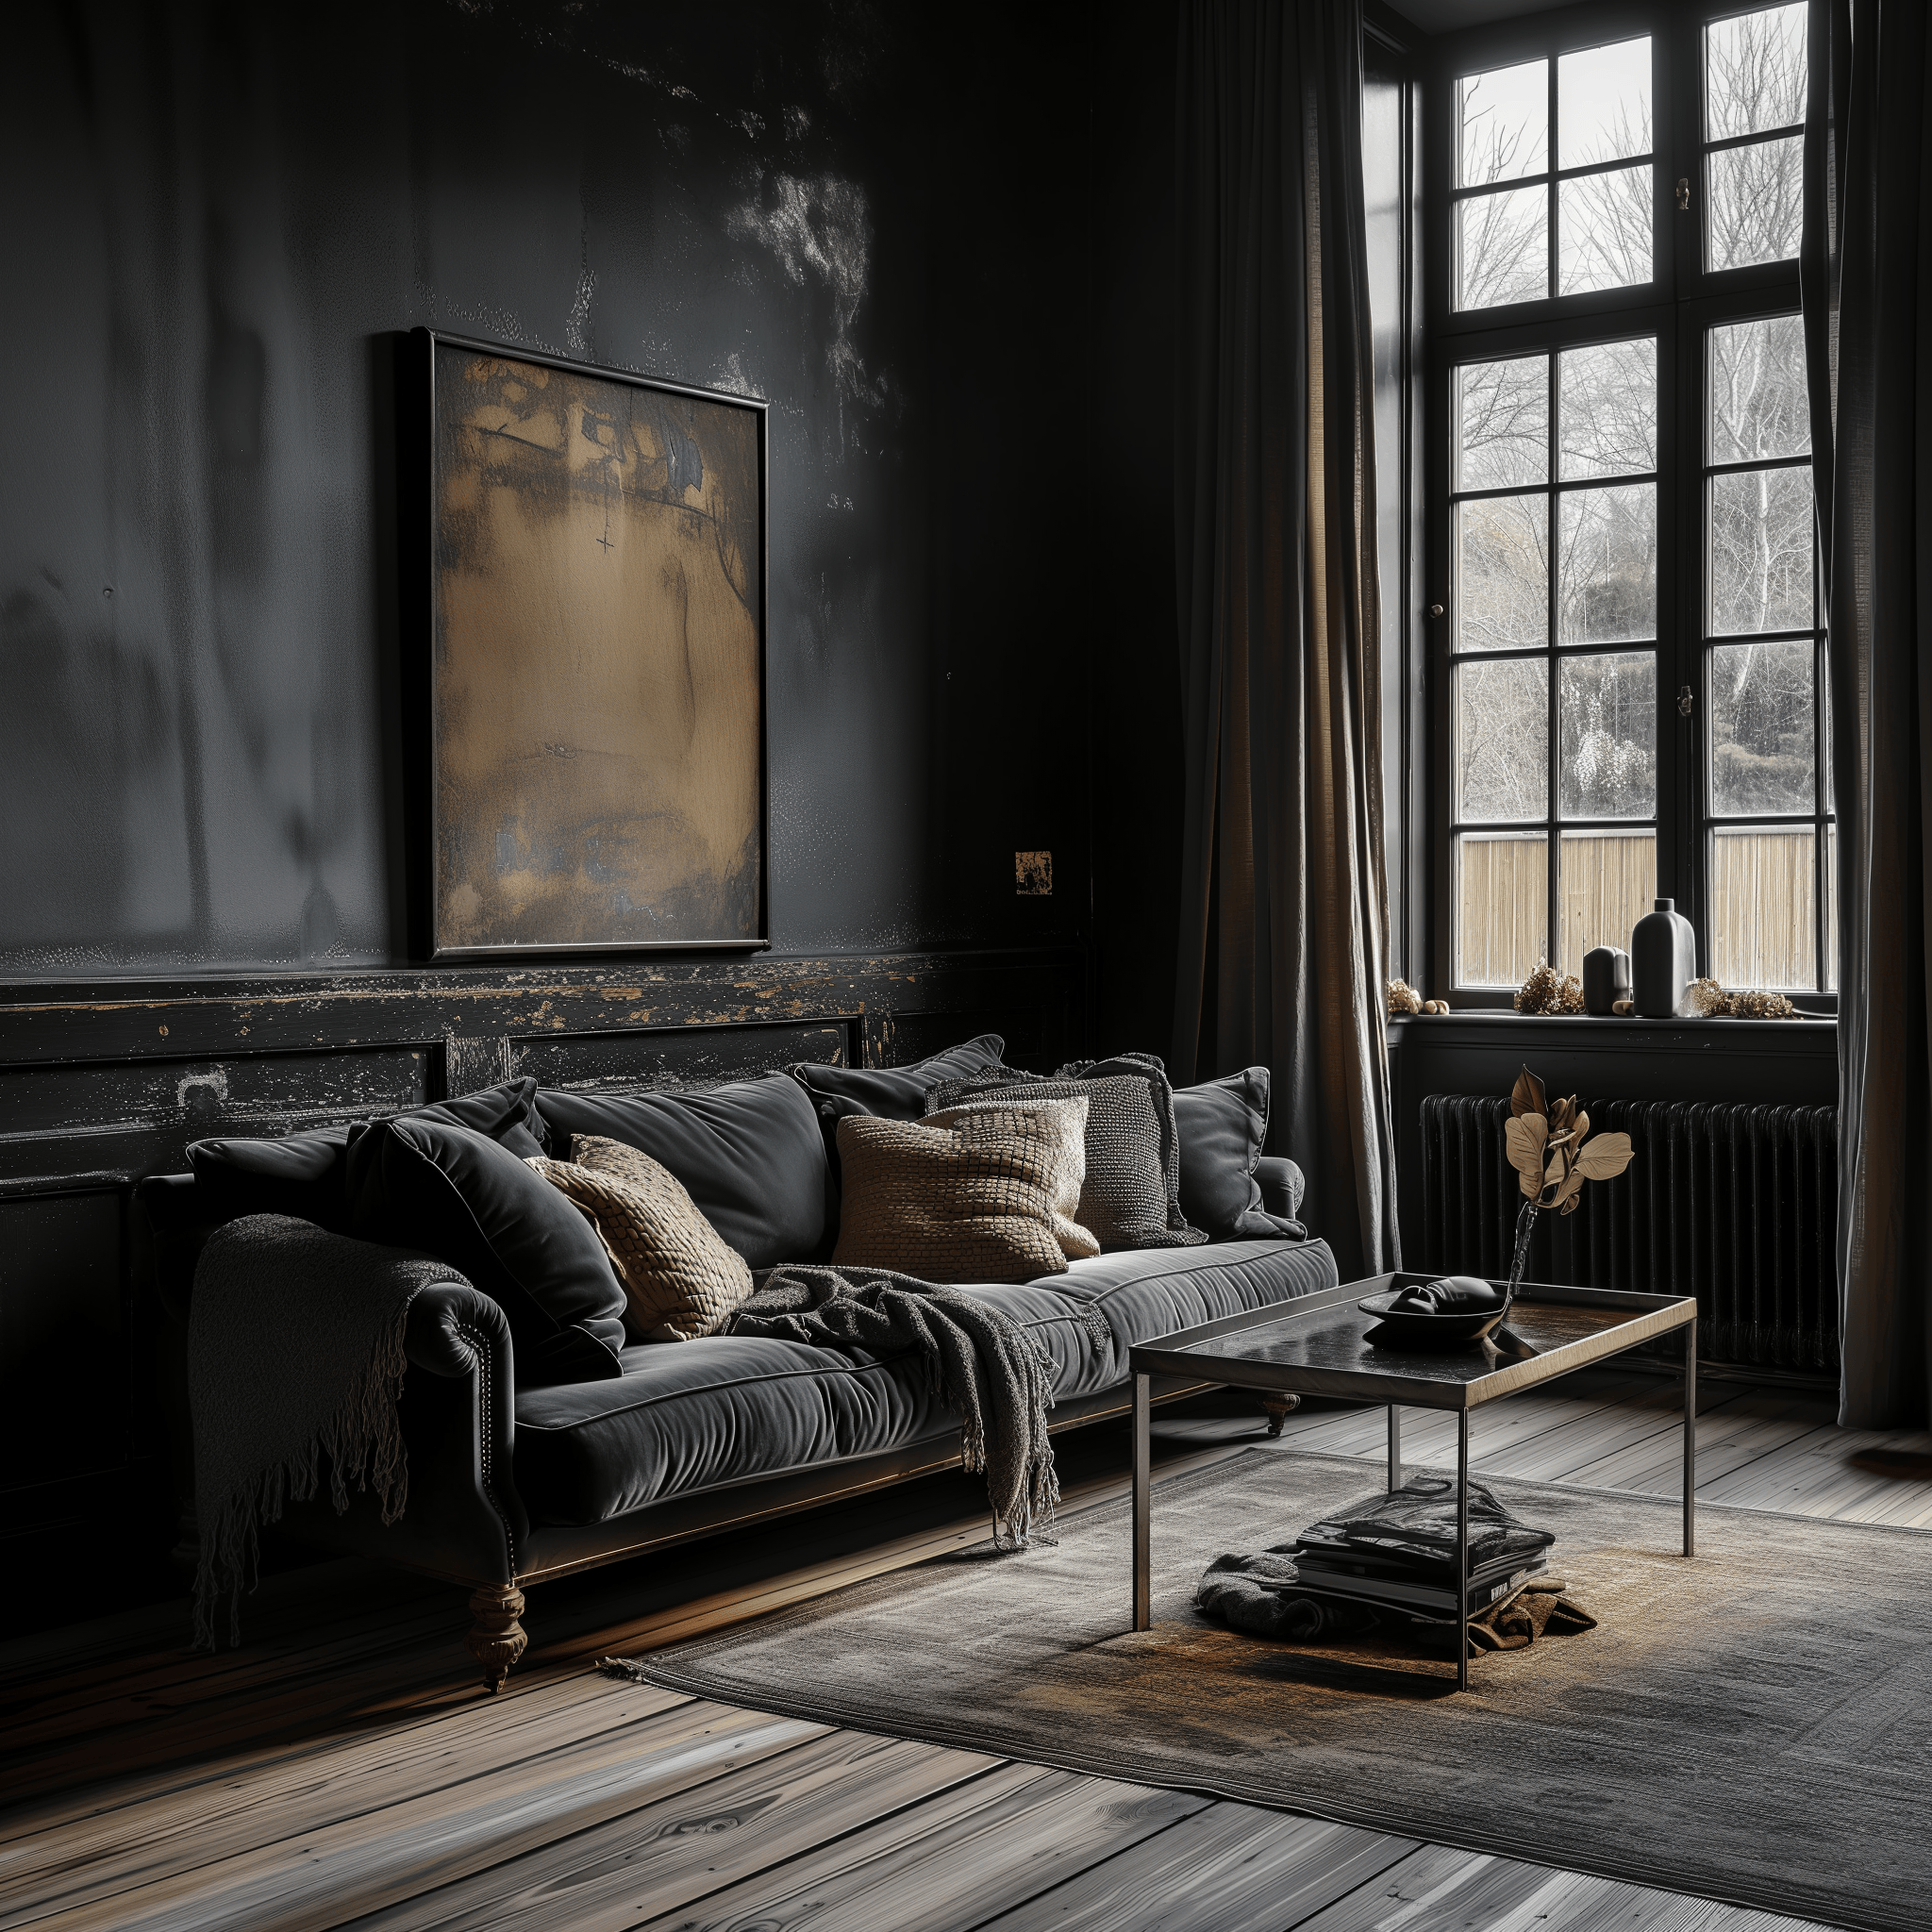 Elegant, dark living room in a real estate photo, featuring eye-level architectural details and high-end, cozy textiles.